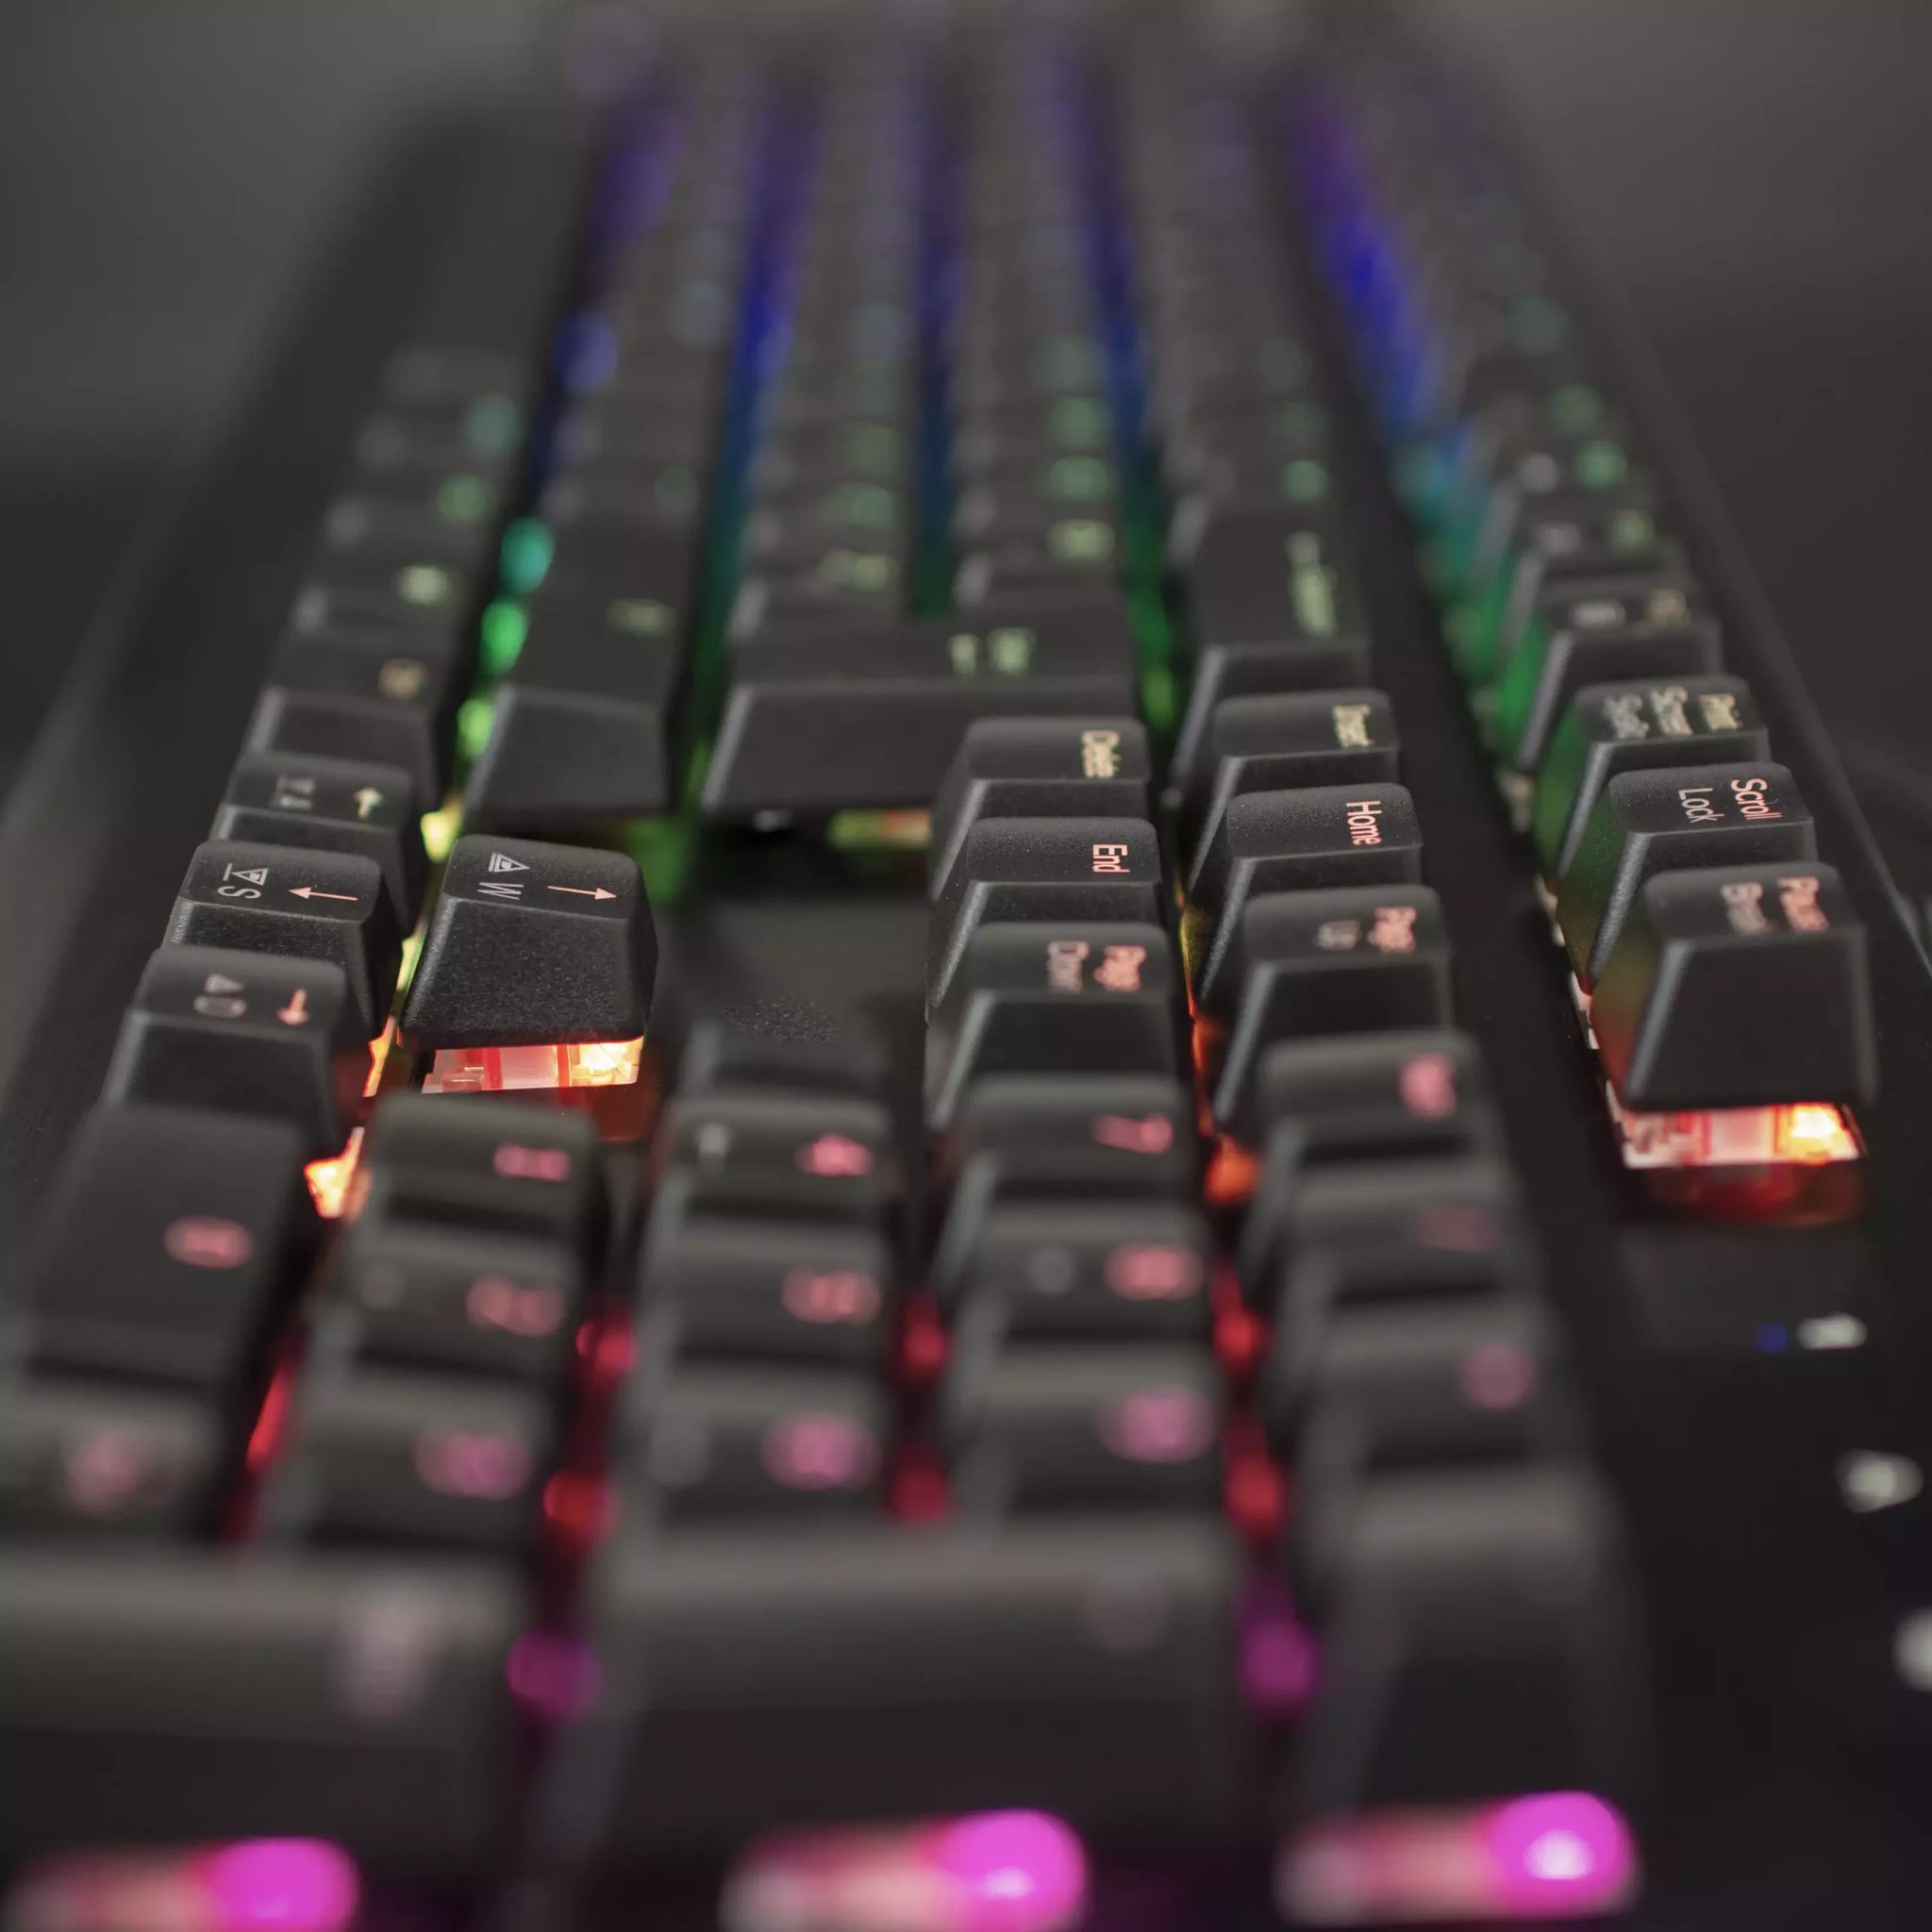 Avalon Keyboard stronghold RGB Gaming Mechanical Blue Switches